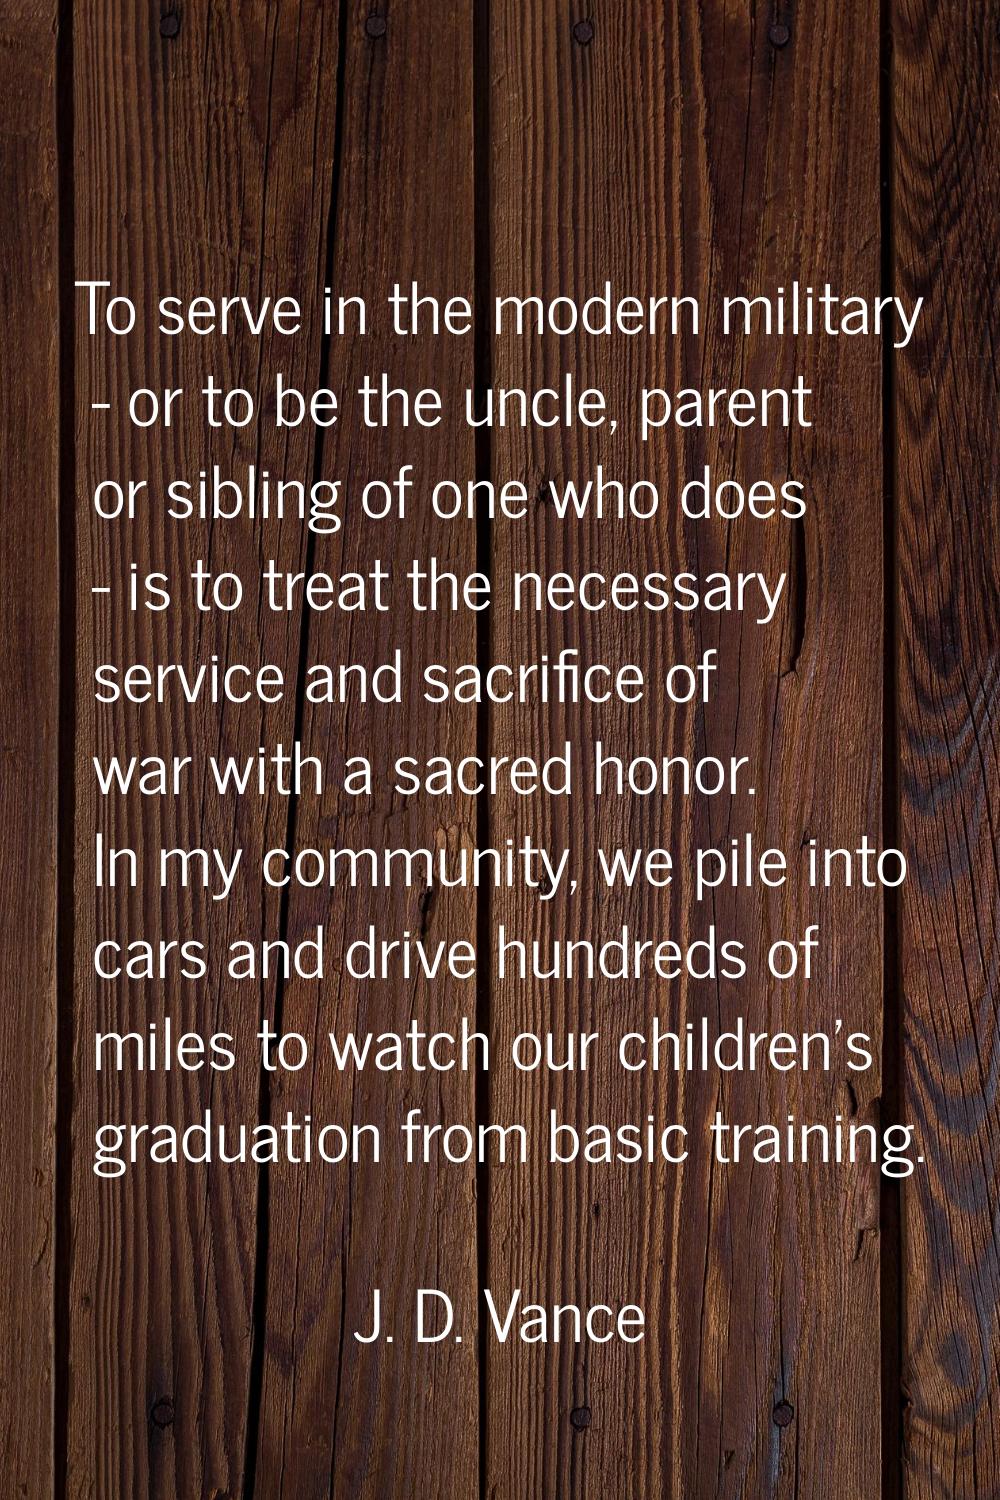 To serve in the modern military - or to be the uncle, parent or sibling of one who does - is to tre